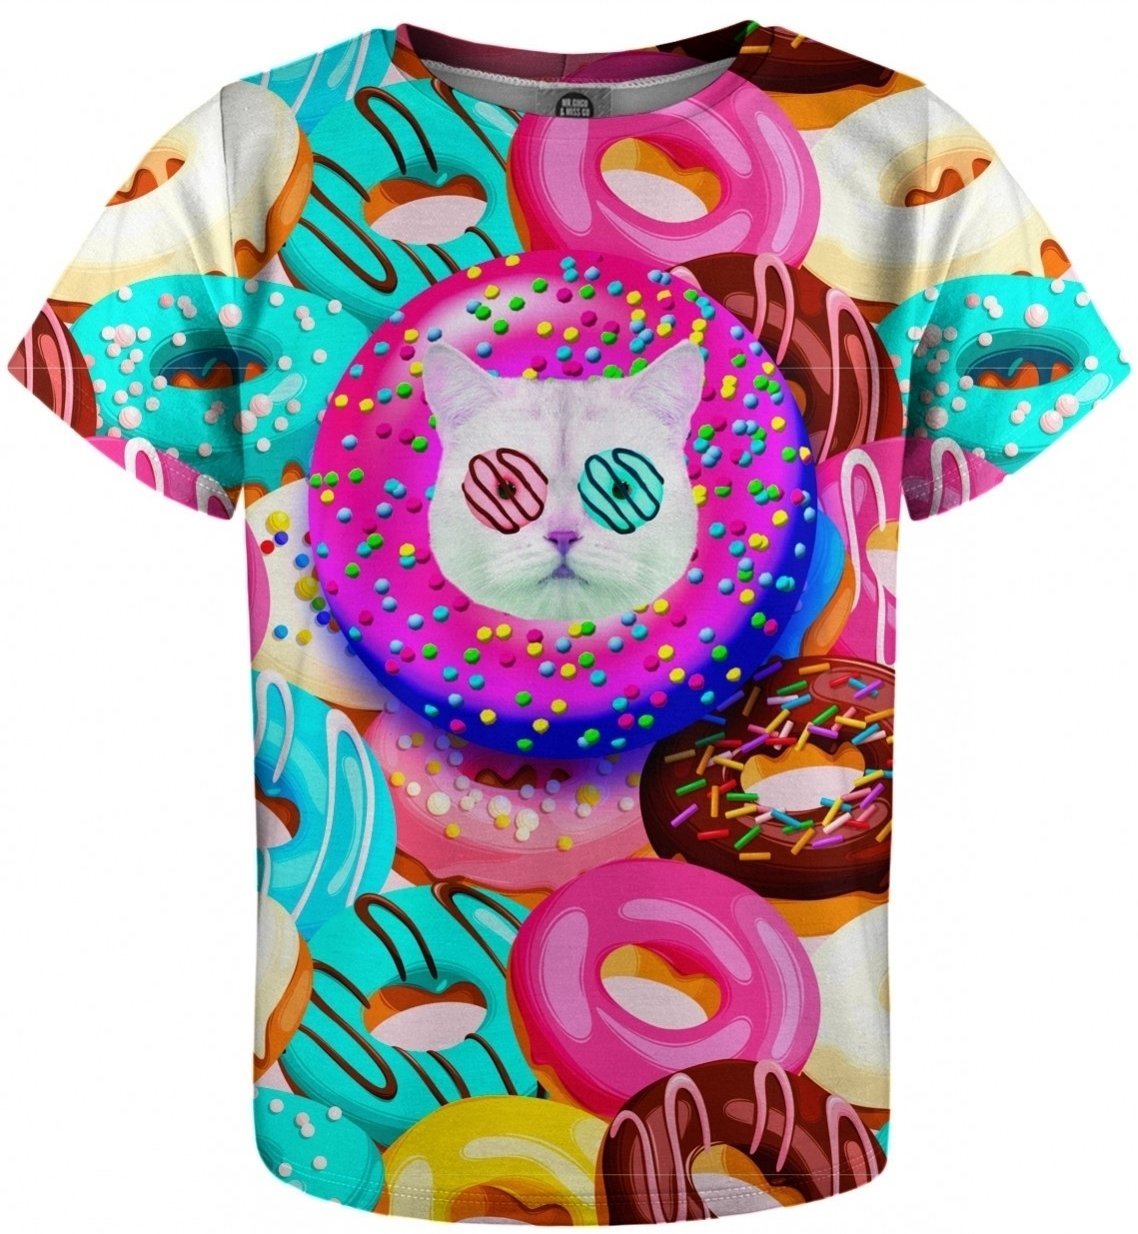 Shirt Mr. Gugu and Miss Go Shirt Donut Cat T-Shirt for Kids 10 - 12 Y